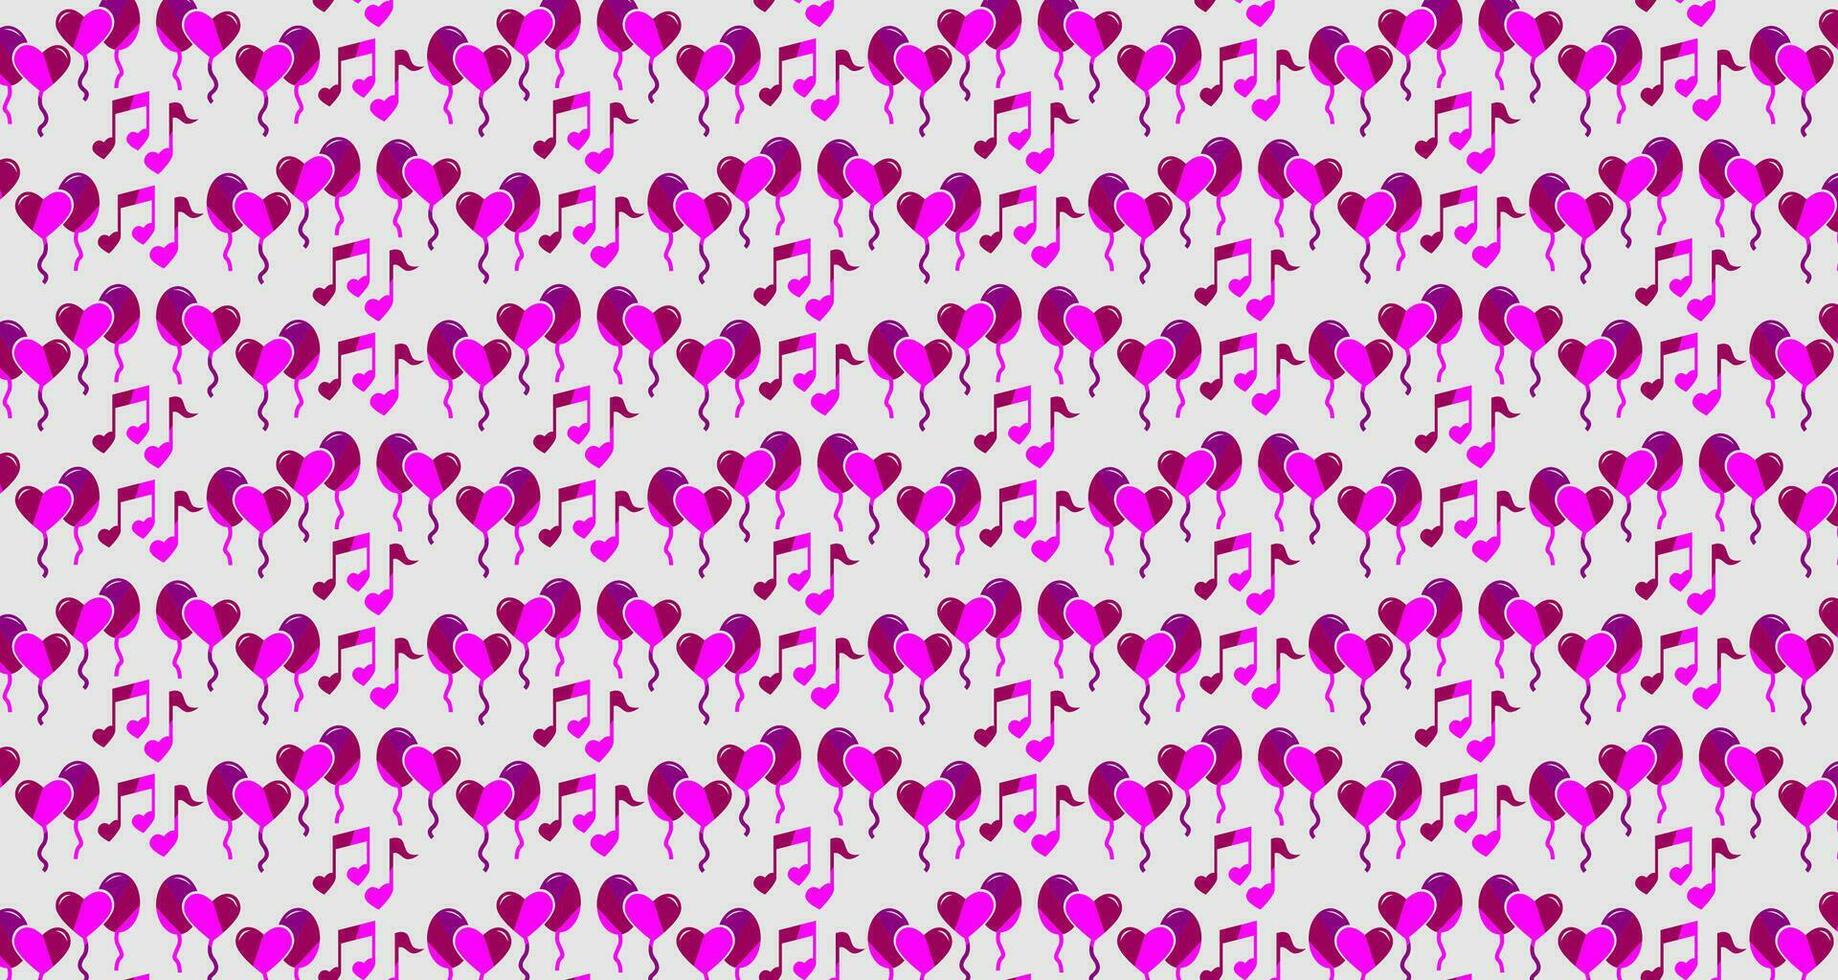 Seamless romantic pattern with hand drawn hearts ballons and tones on white background. Ready template for design, postcards, print, poster, party, valentine's day, vintage textile. vector